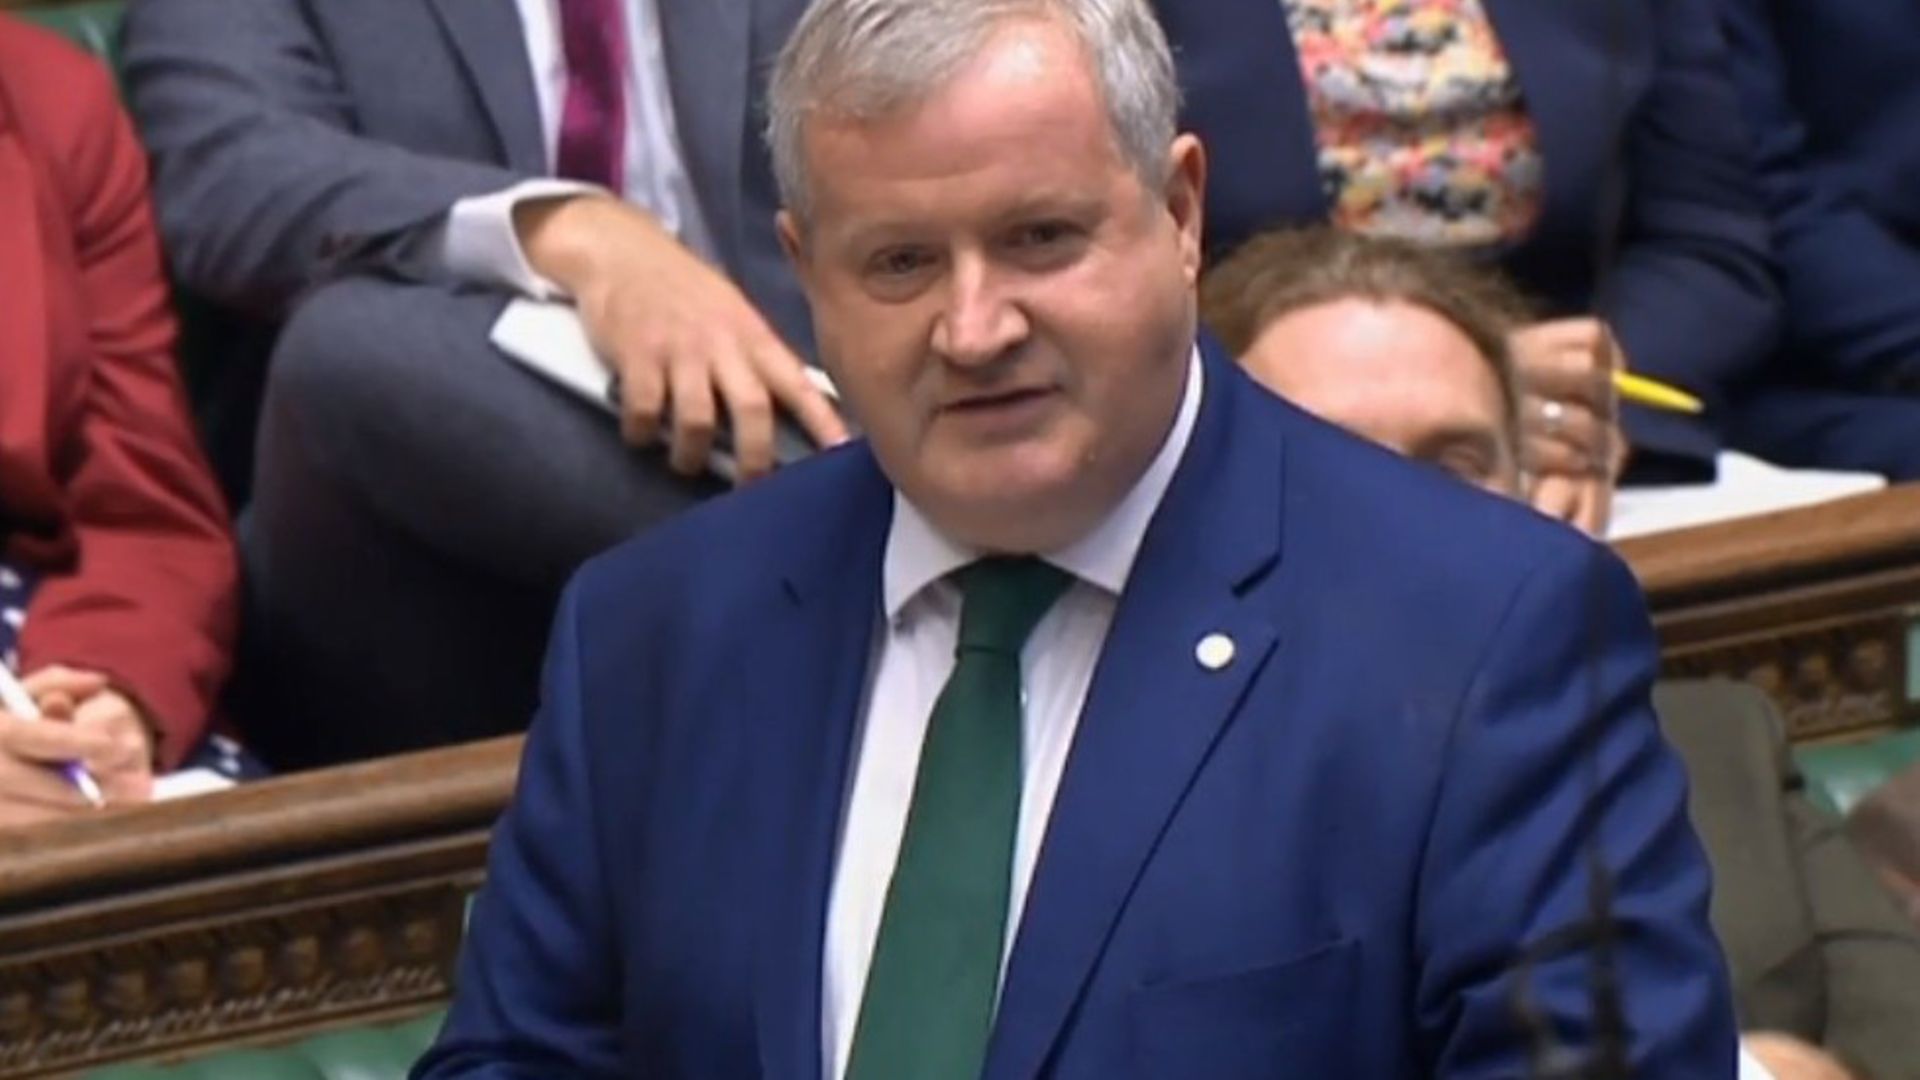 Ian Blackford speaking in the House of Commons - Credit: Parliament Live